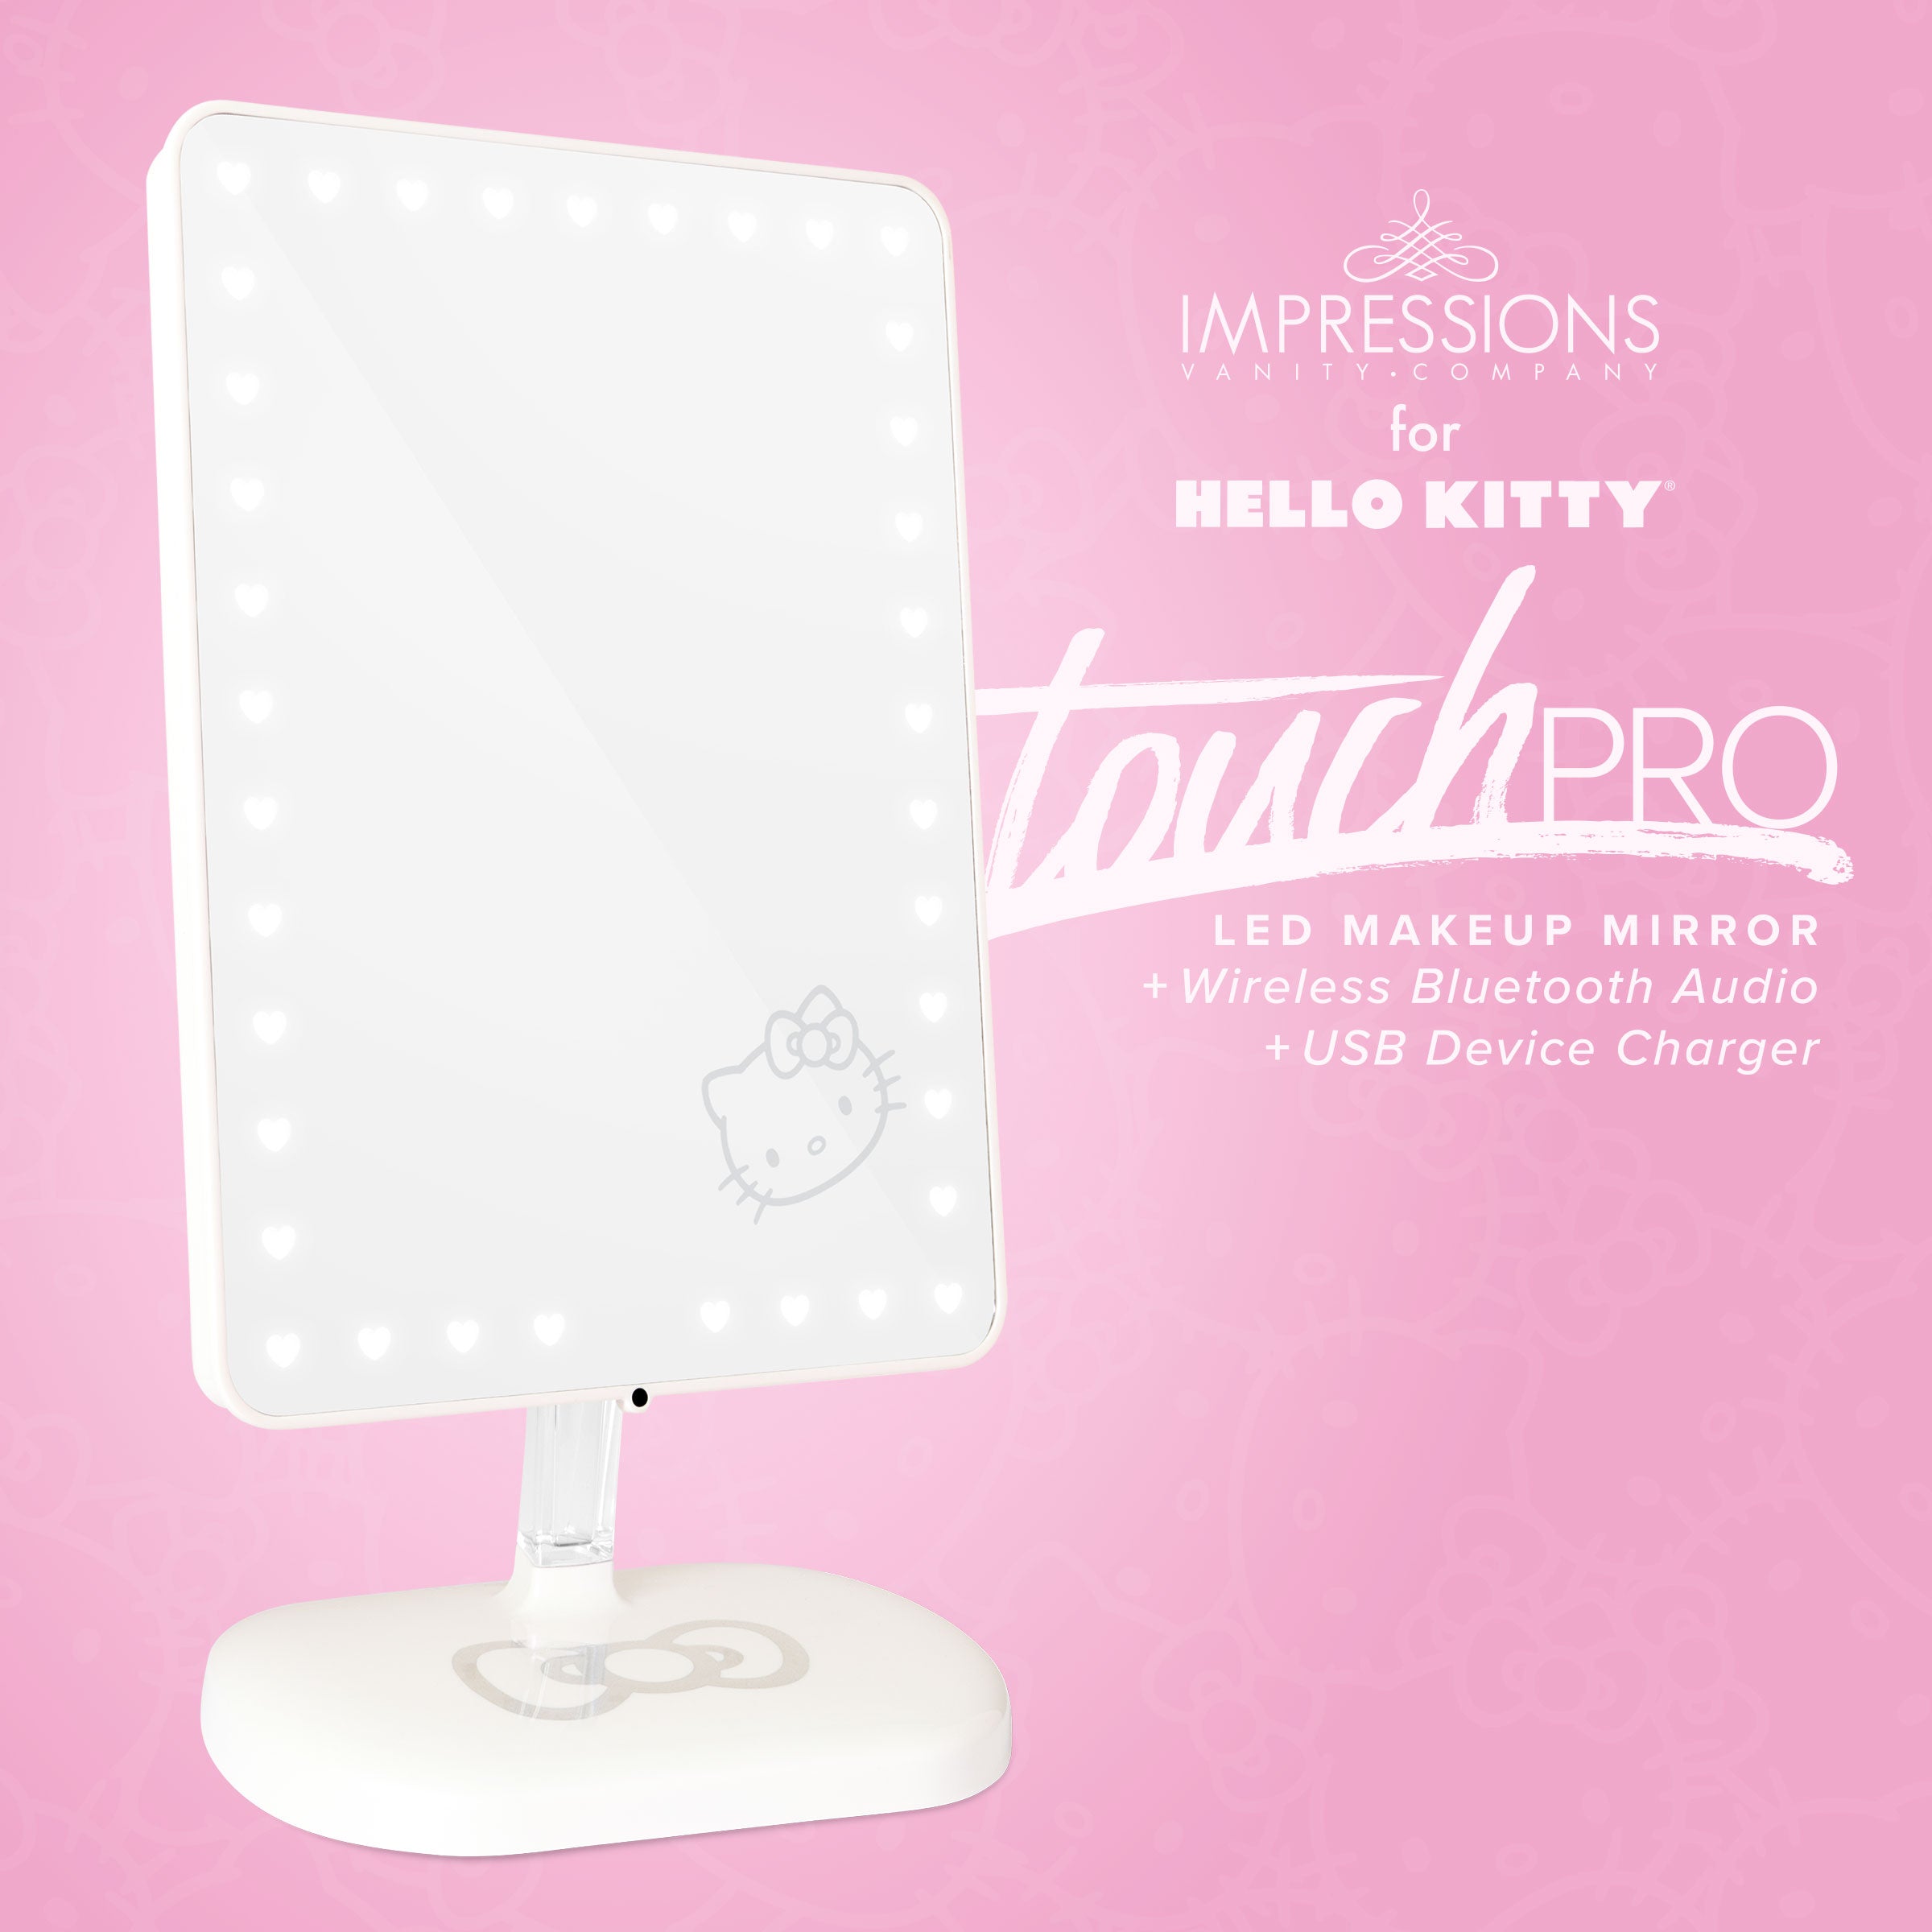 Hello Kitty Edition Touch Pro LED Makeup Mirror with Bluetooth